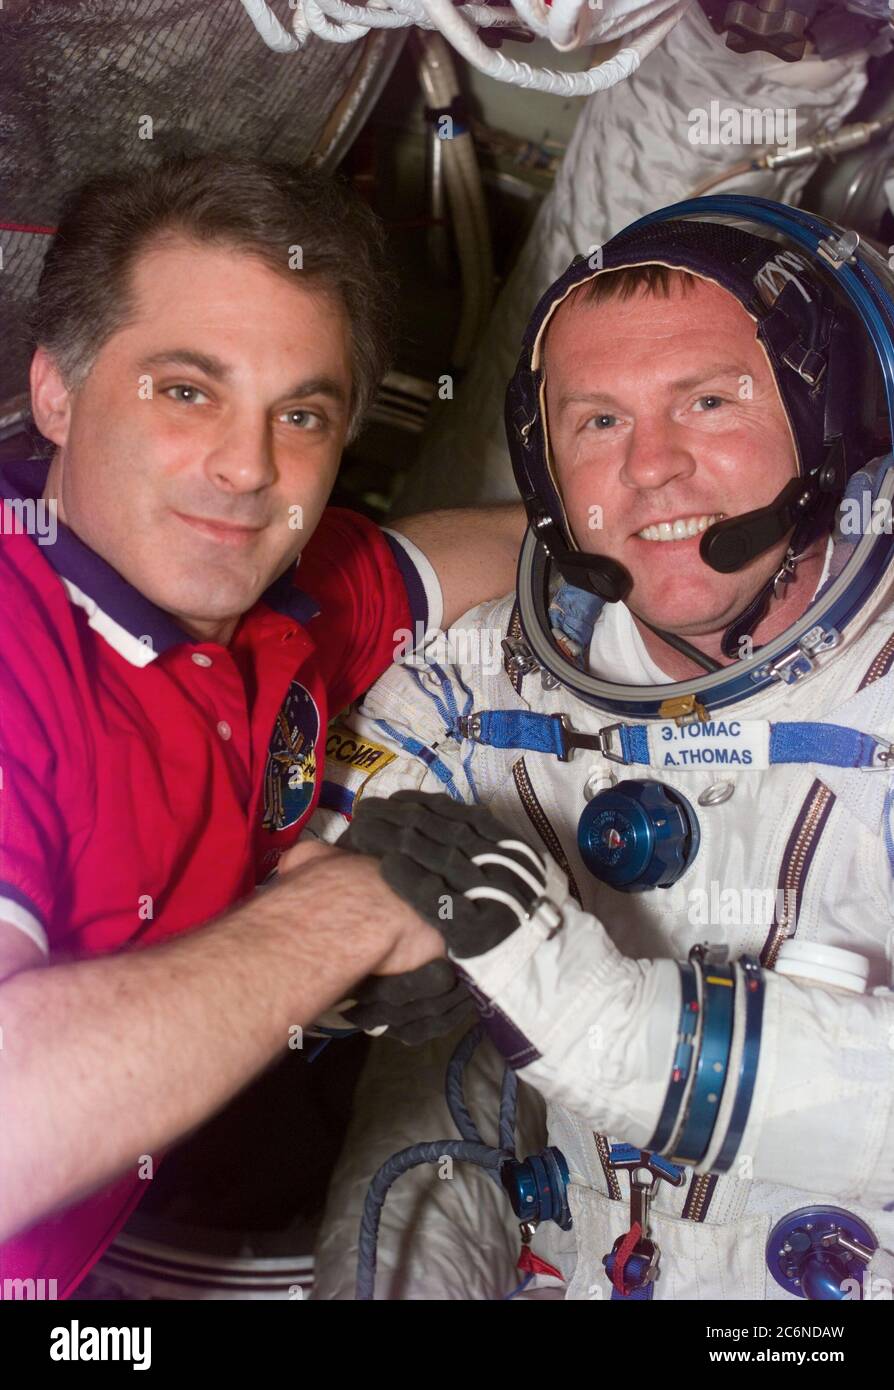 (26 Jan 1998) --- This Electronic Still Camera (ESC) image shows astronauts David A. Wolf and Andrew S. W. Thomas embracing, after Thomas' second Russian Sokol spacesuit test, onboard the Russian Mir Space Station.  Upon Thomas' arrival to Mir he had problems with his Sokol suit, however, following suit modifications the suit fit properly.  Thomas, now replacing Wolf as cosmonaut guest researcher, will be the last American astronaut to serve a tour onboard Mir.  This ESC view was taken on January 26, 1998, at 12:56:21 MET. Stock Photo